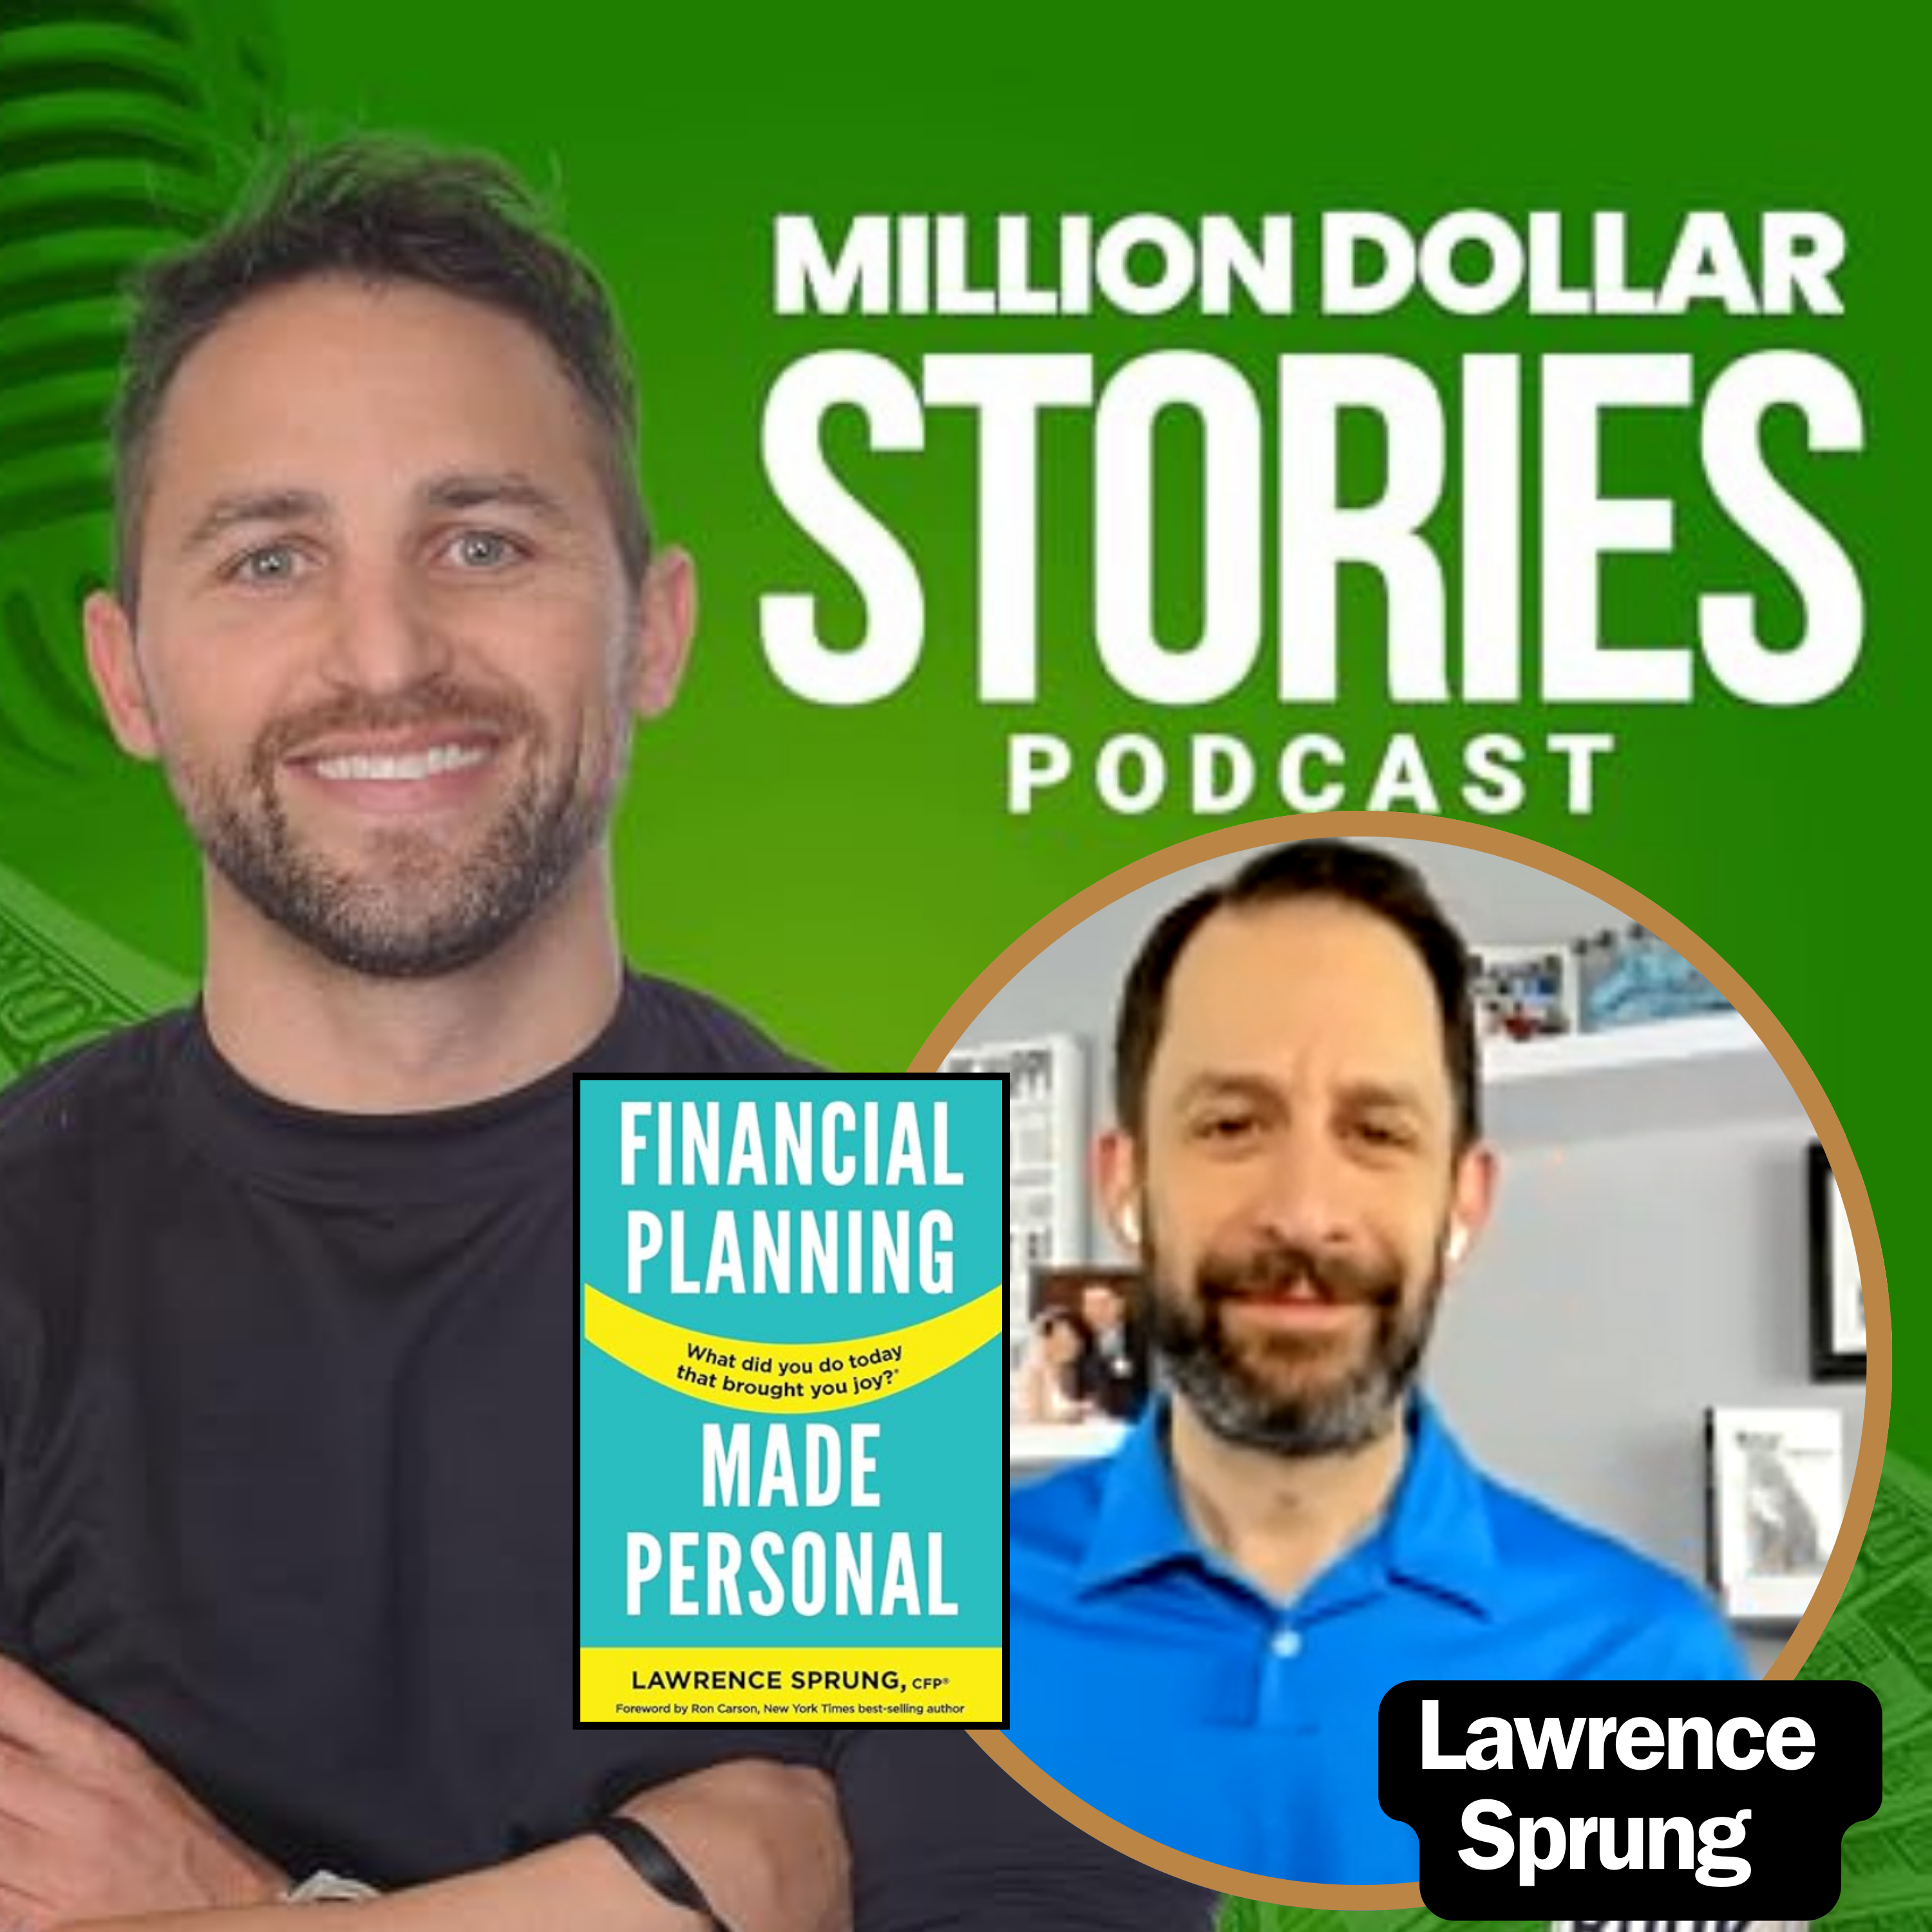 Lawrence Sprung – Author of “Financial Planning Made Personal: How to Create Joy and the Mindset for Success”